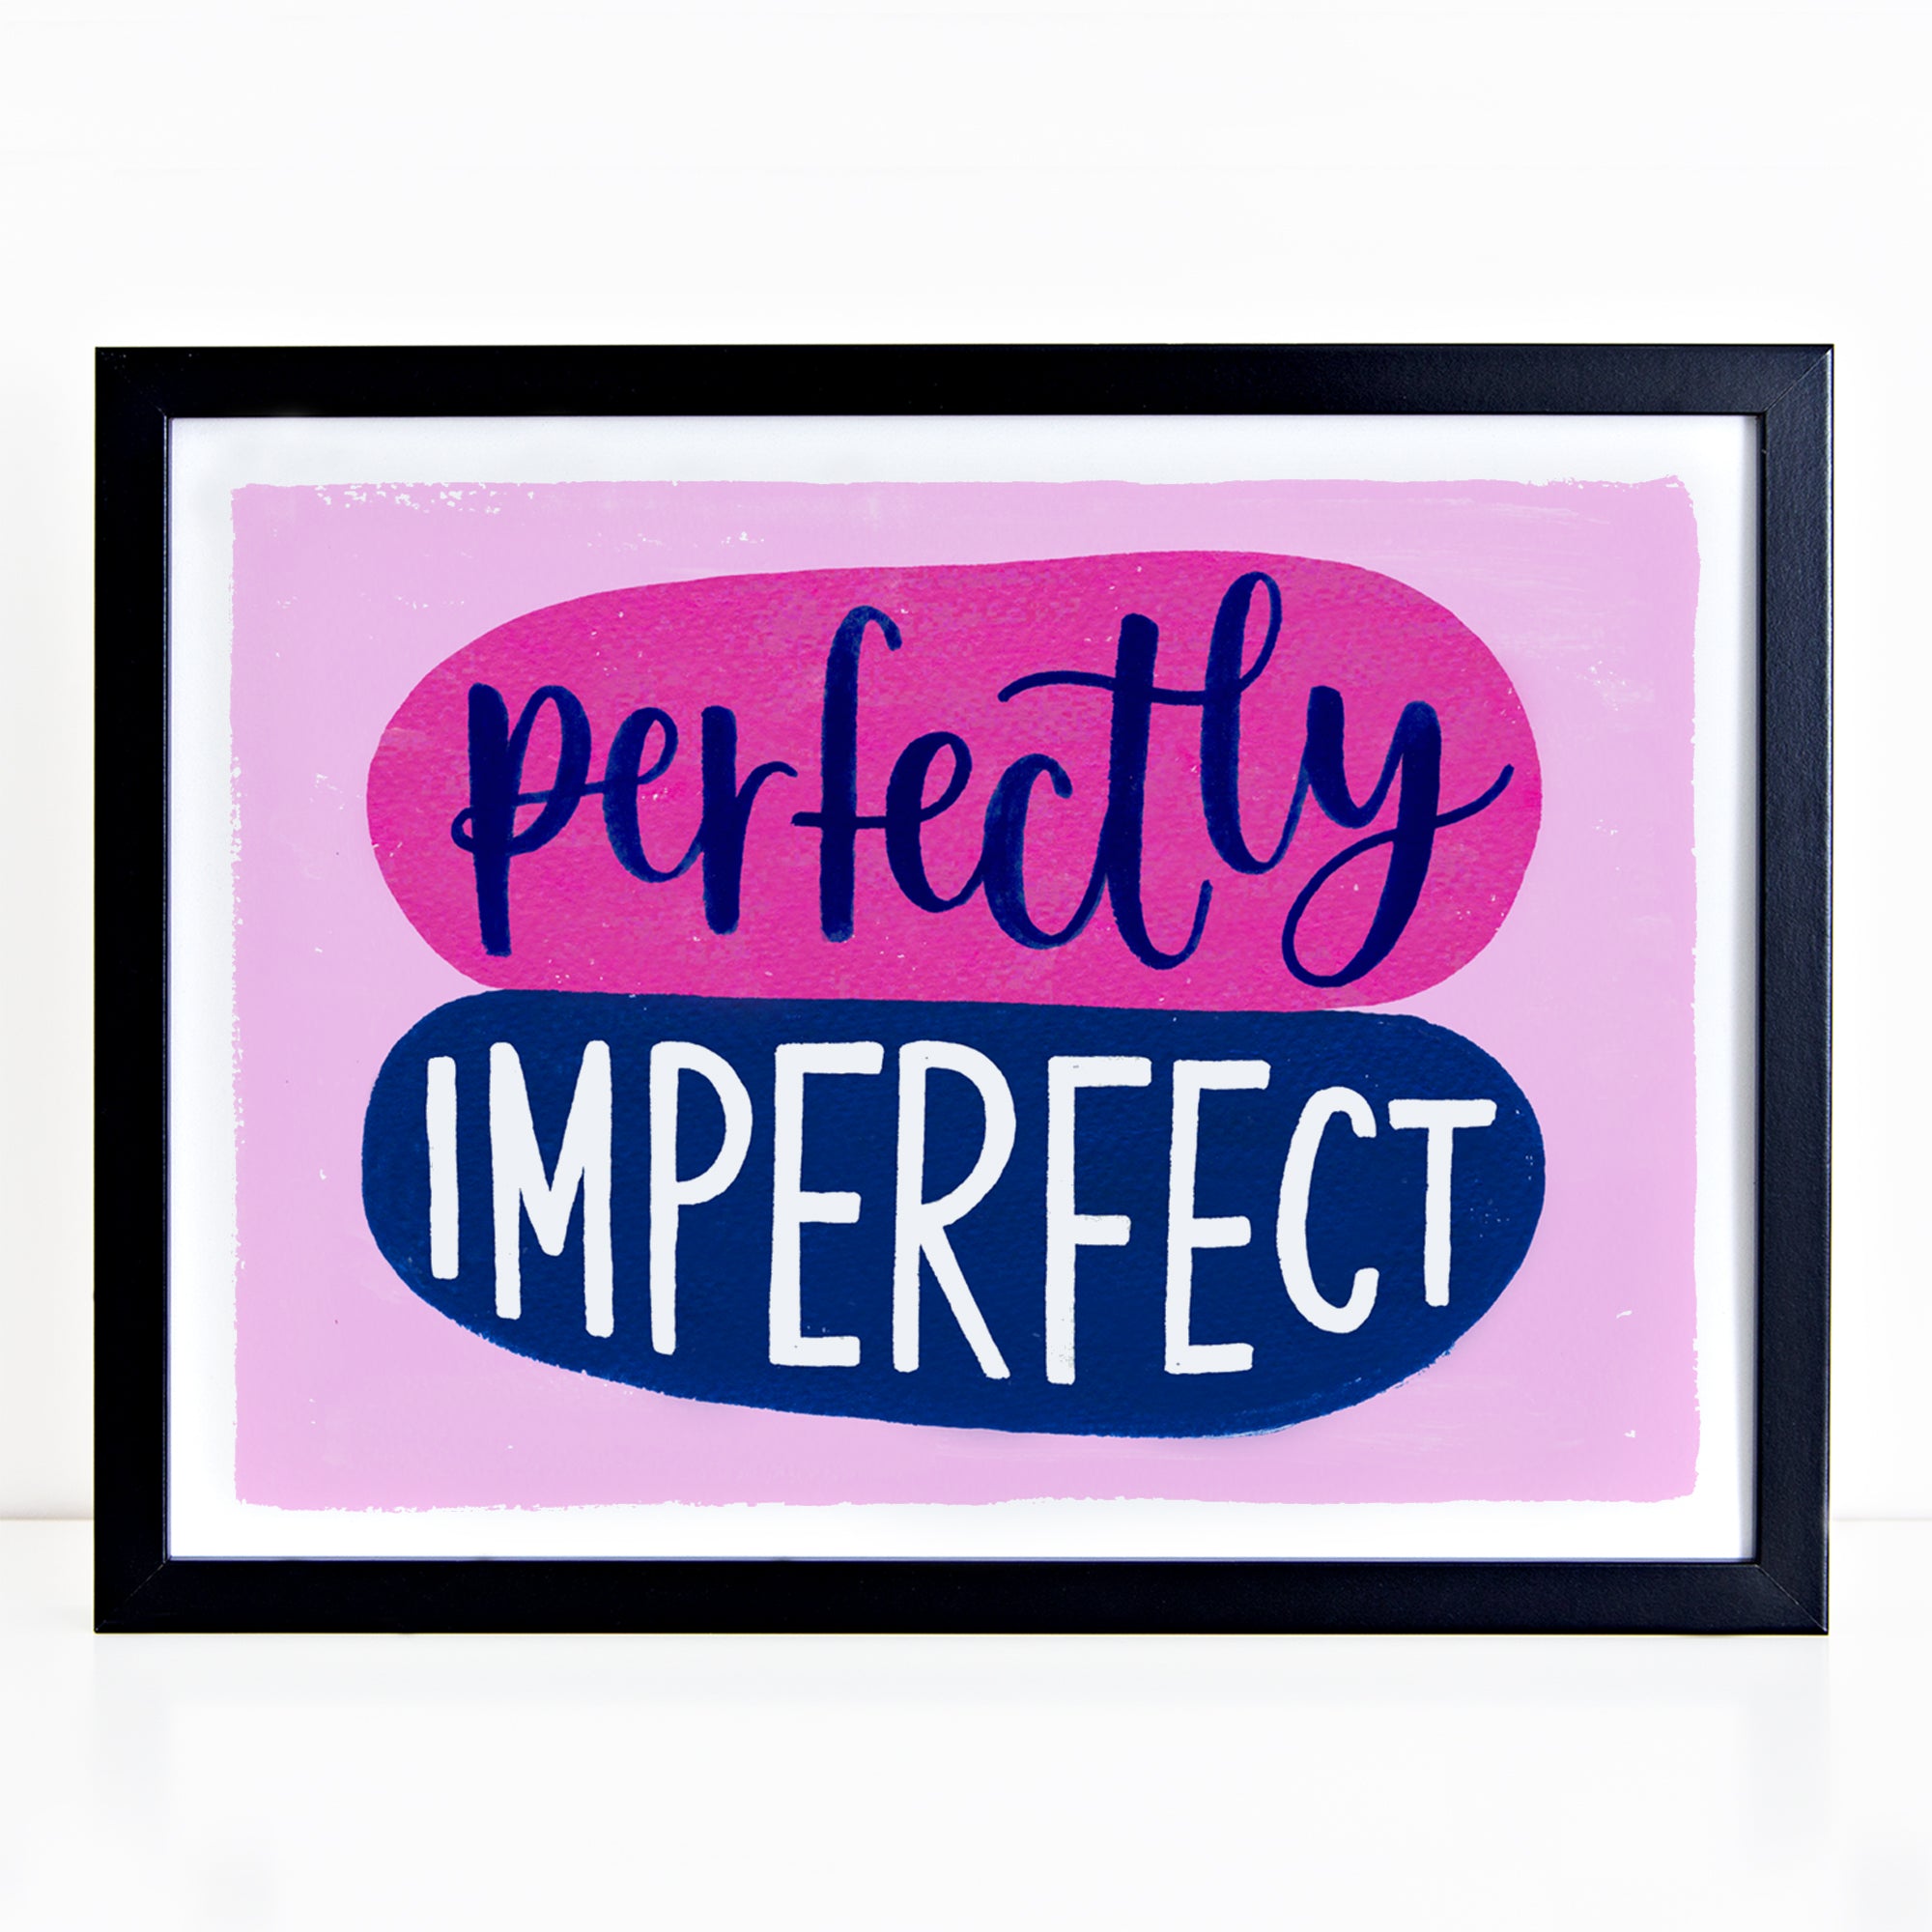 Colourful motivational print - Perfectly imperfect